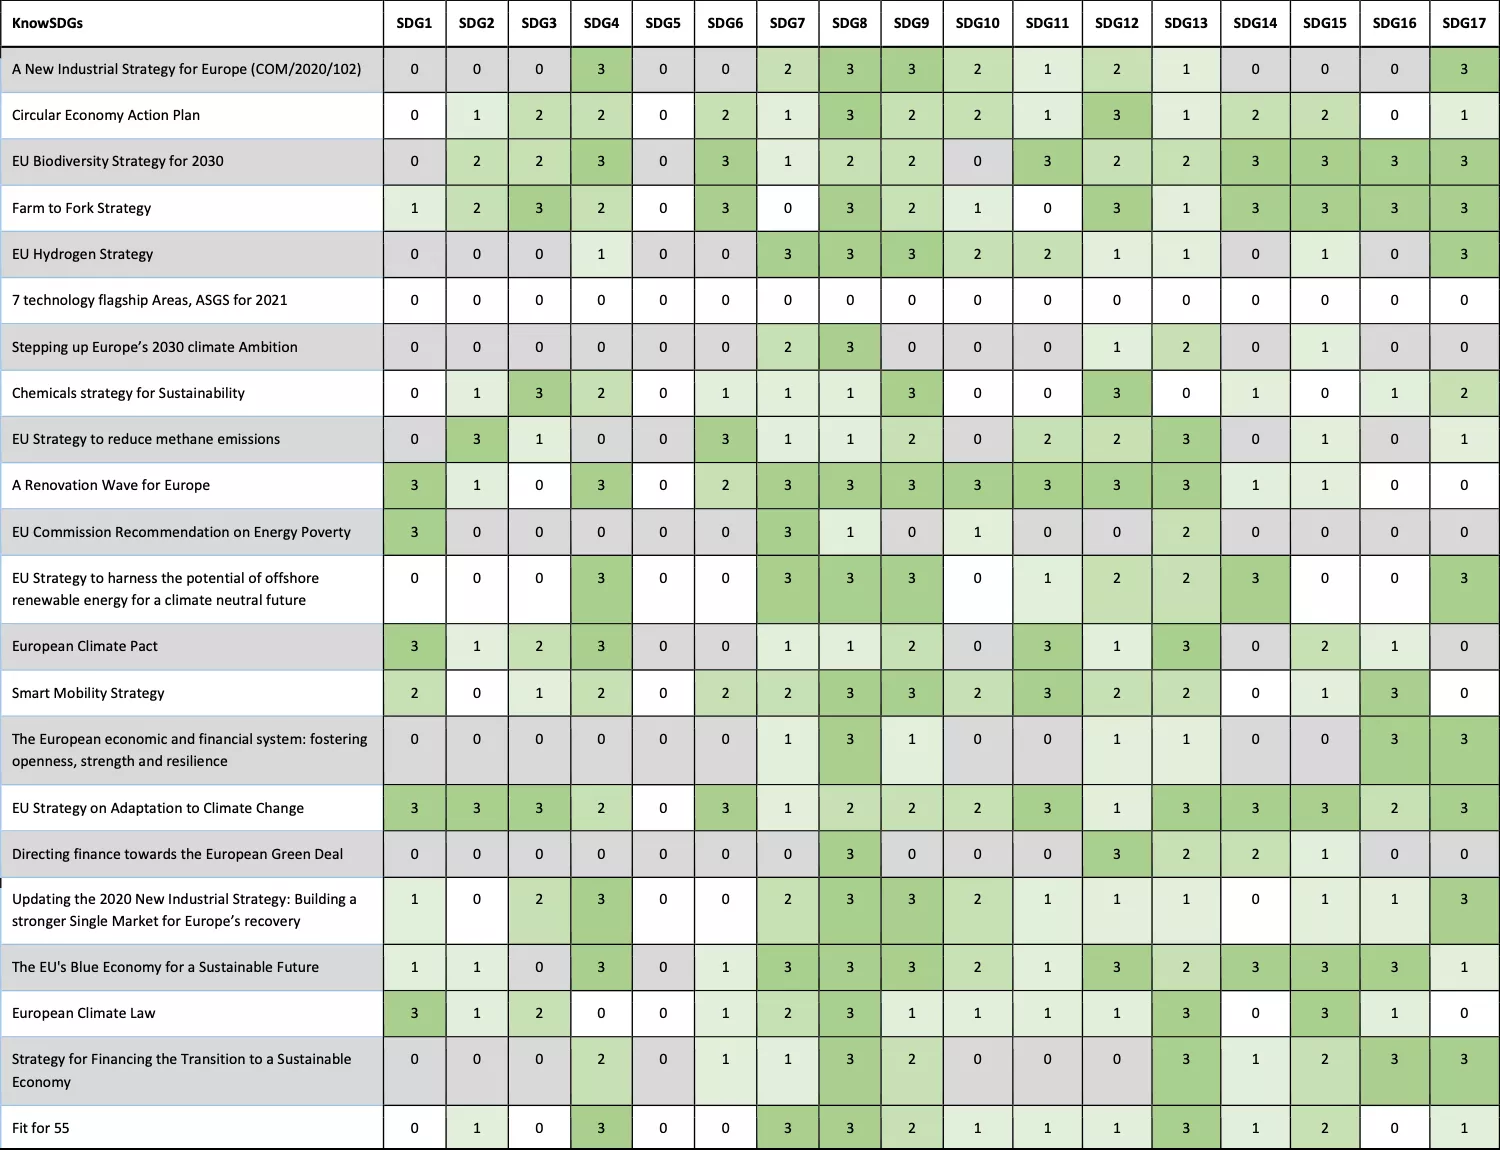 Table 6 Transformed scores of the "KnowSDGs" platform